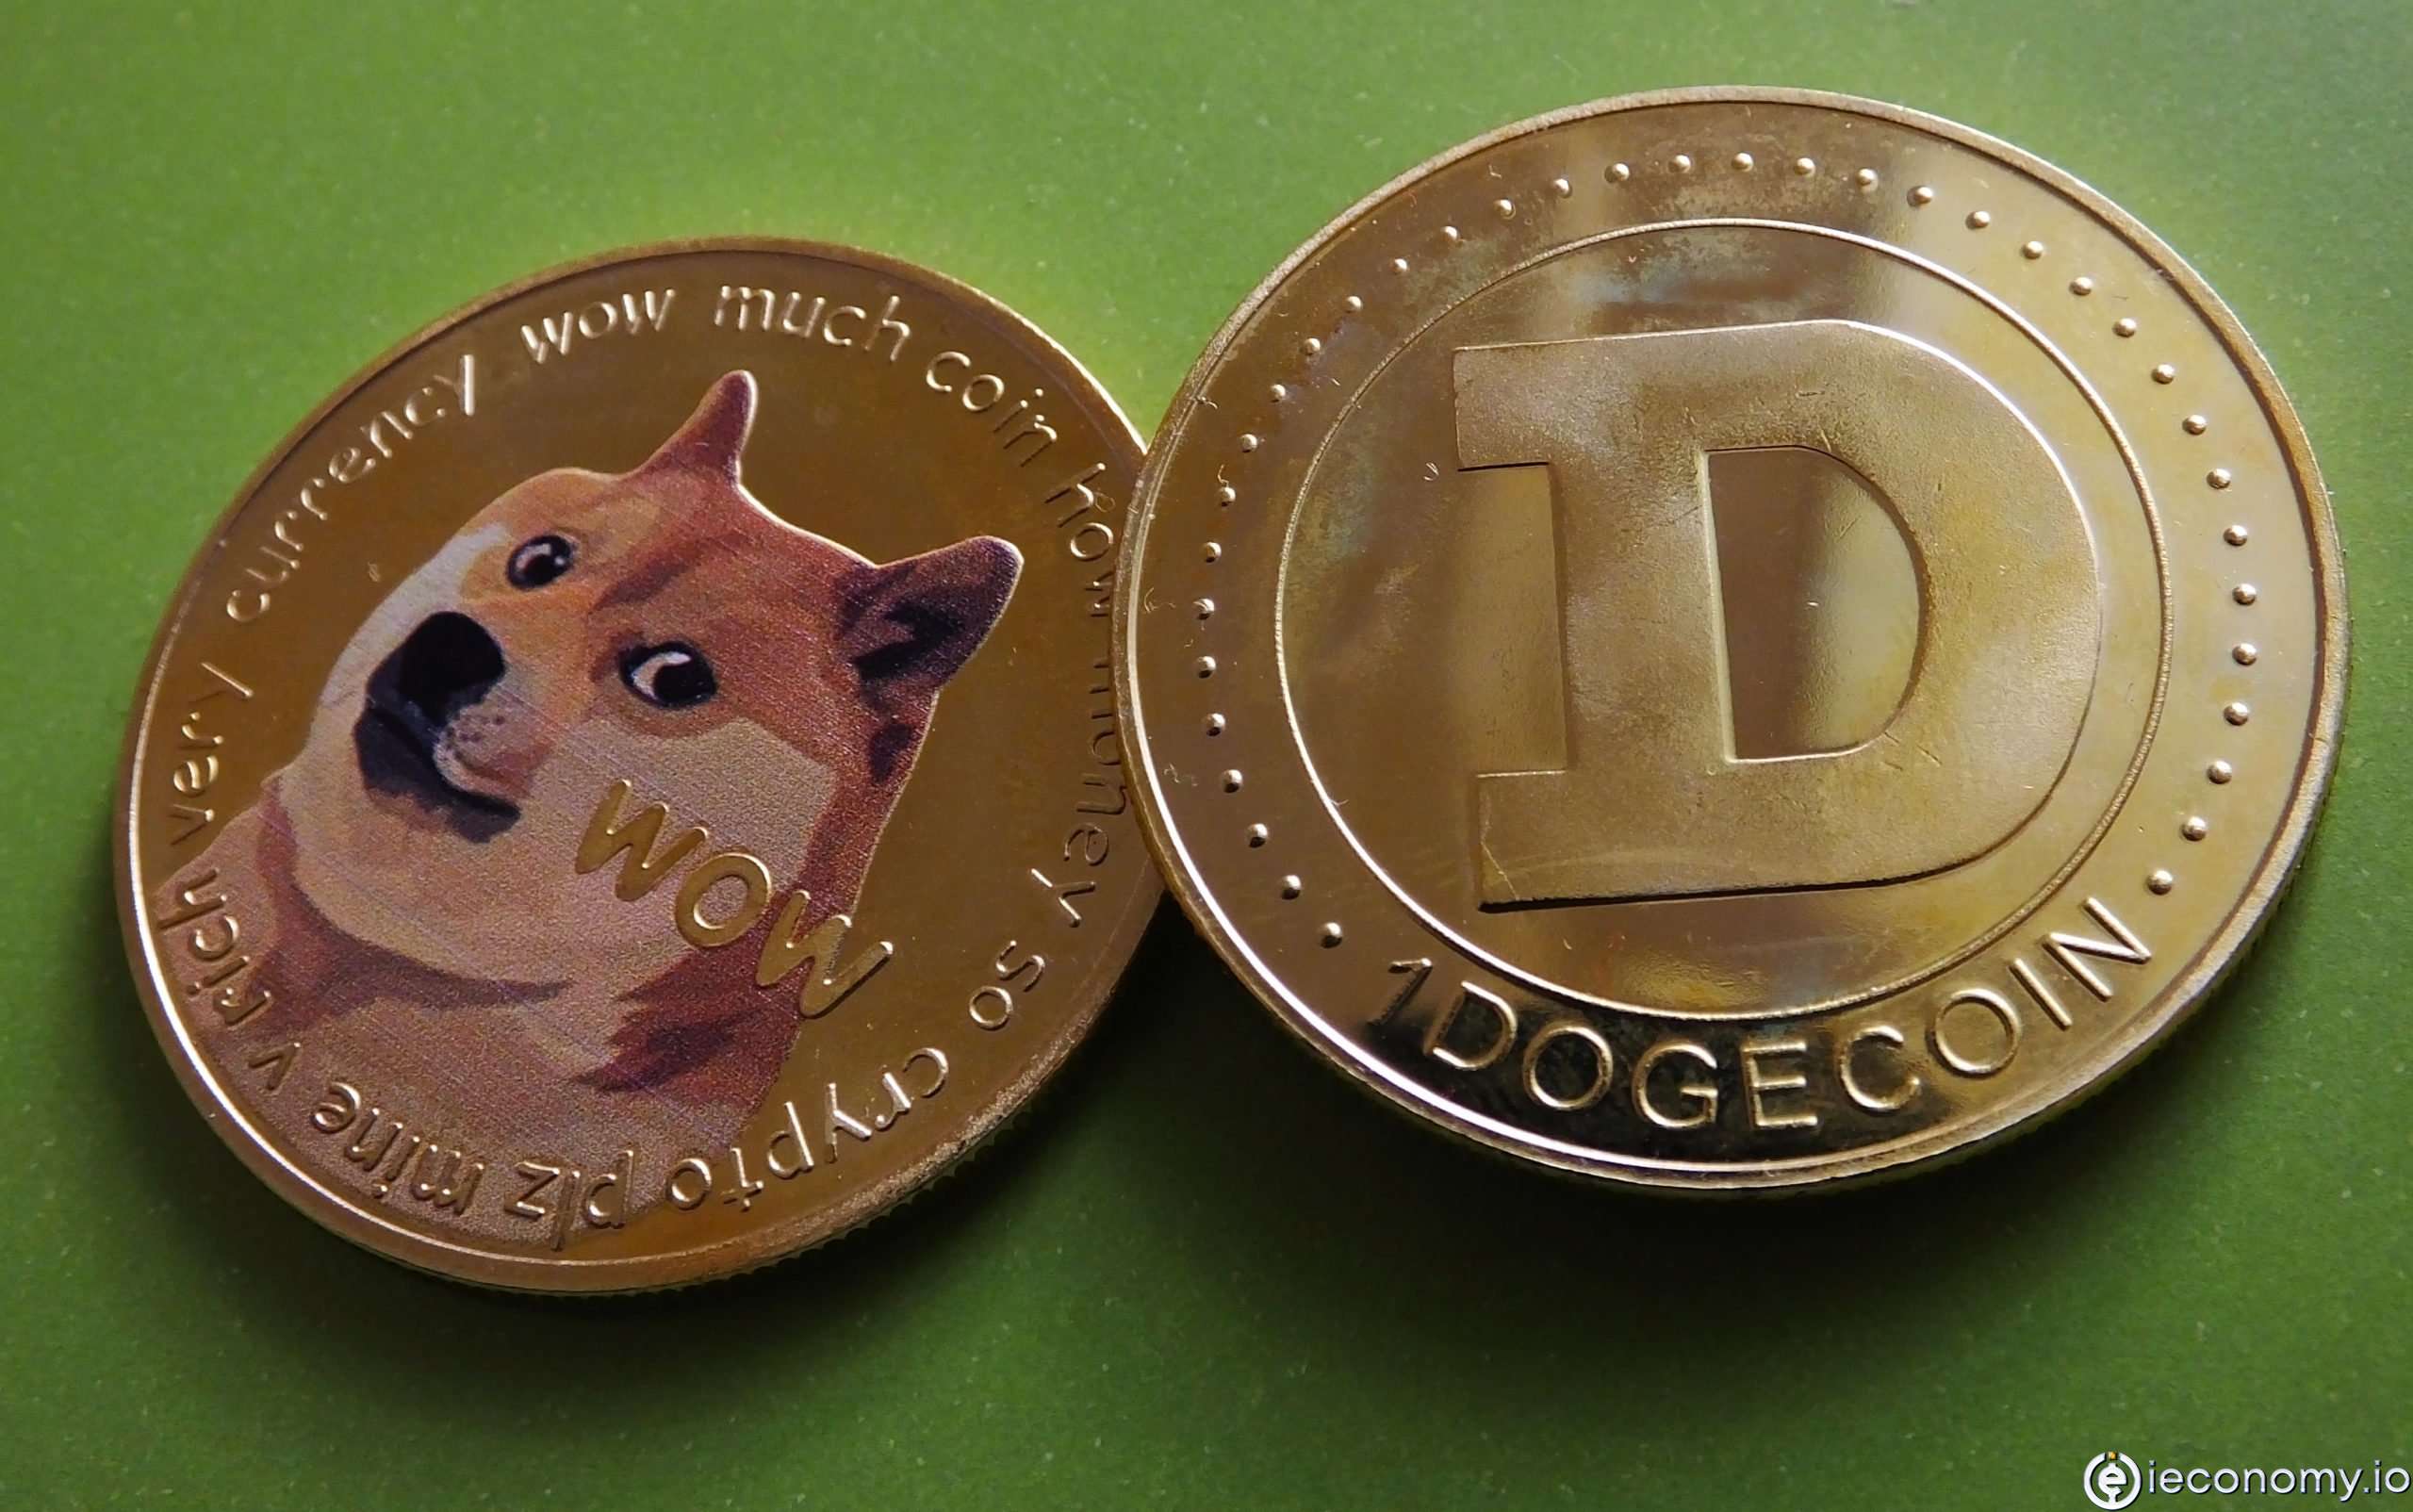 Dogecoin Is Now Traded on Coinbase Pro